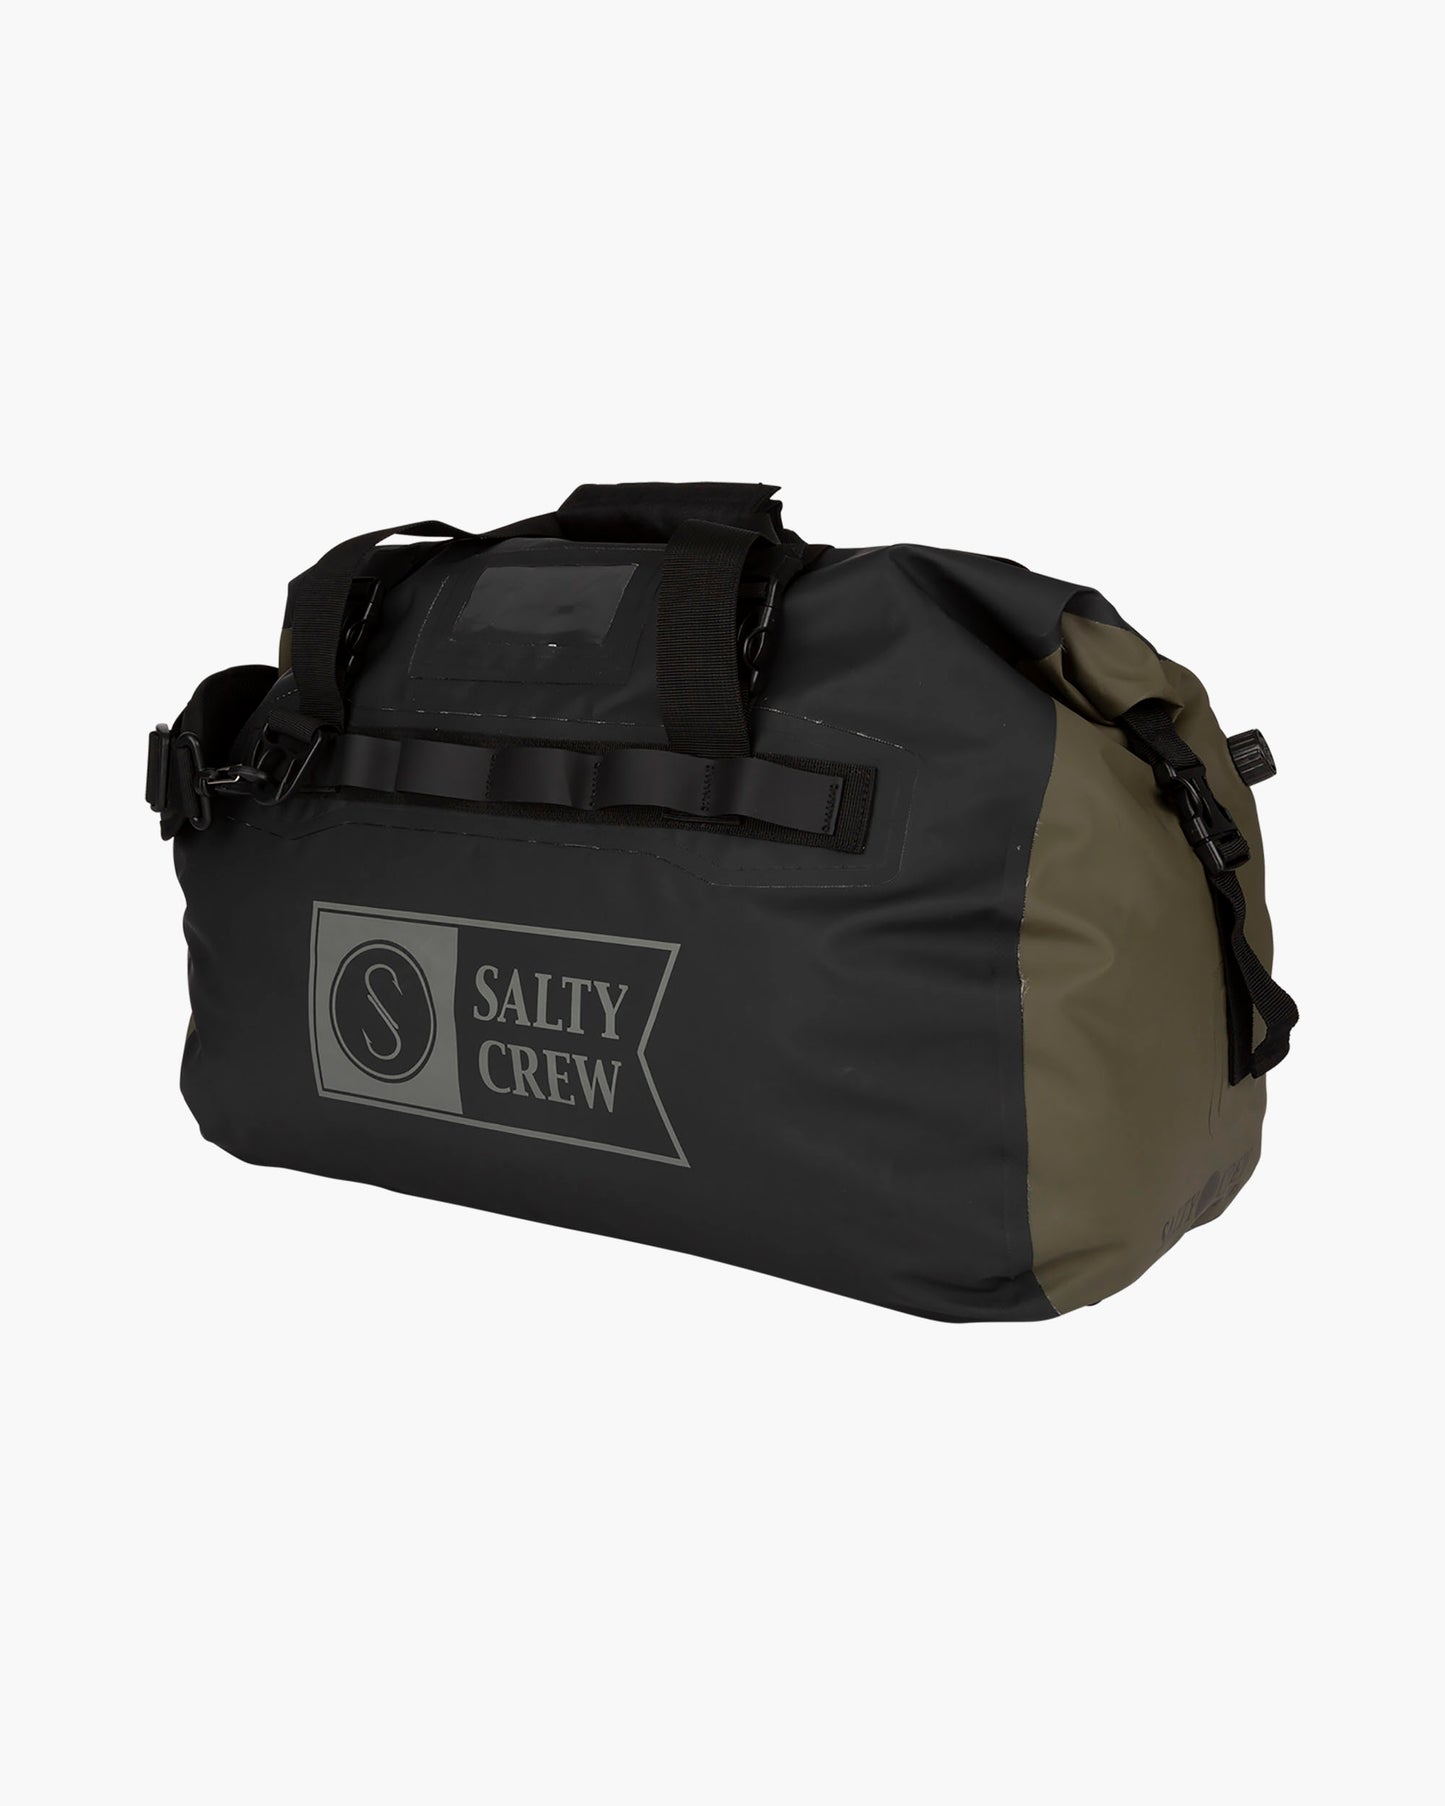 VOYAGER DUFFLE - Black/Military